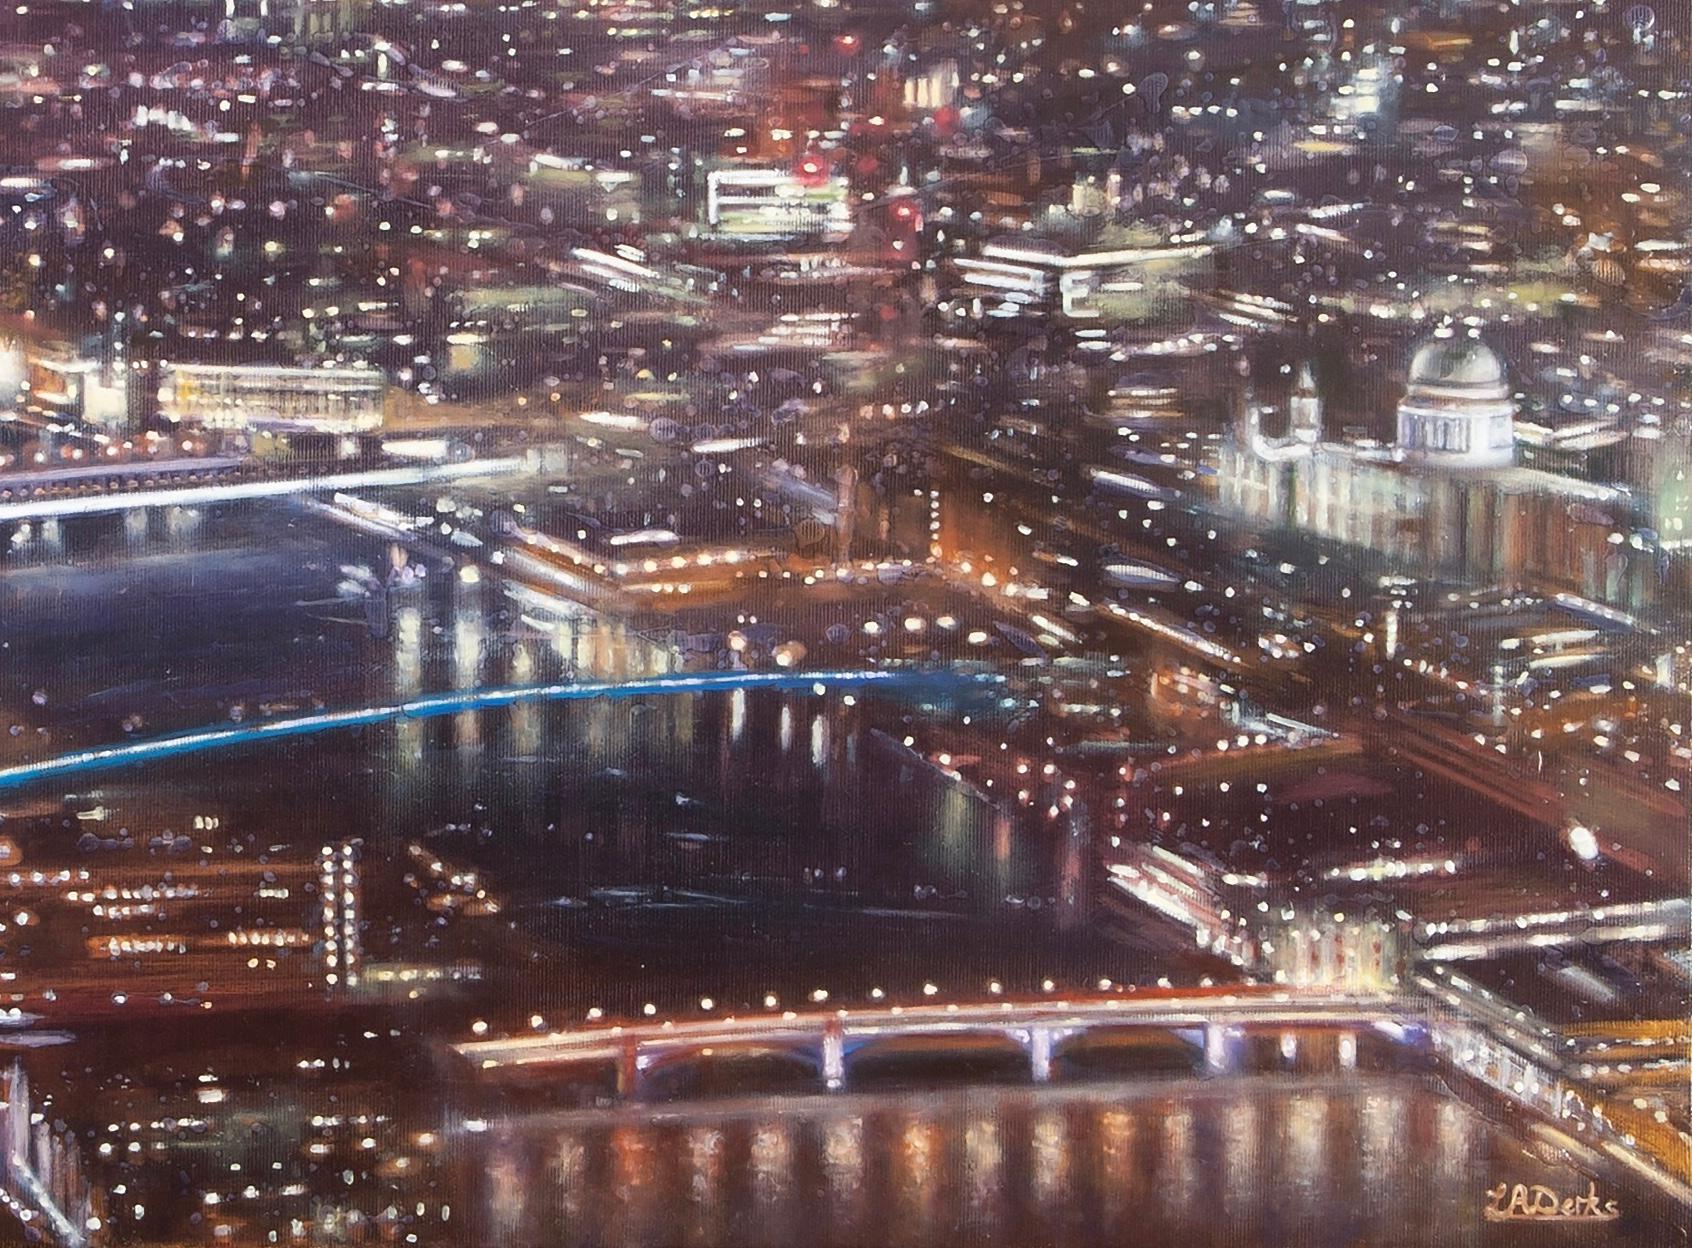 View of St. Pauls from the Shard, Vibrant Cityscape of London, Evening Skyline - Realist Painting by Lesley Anne Derks